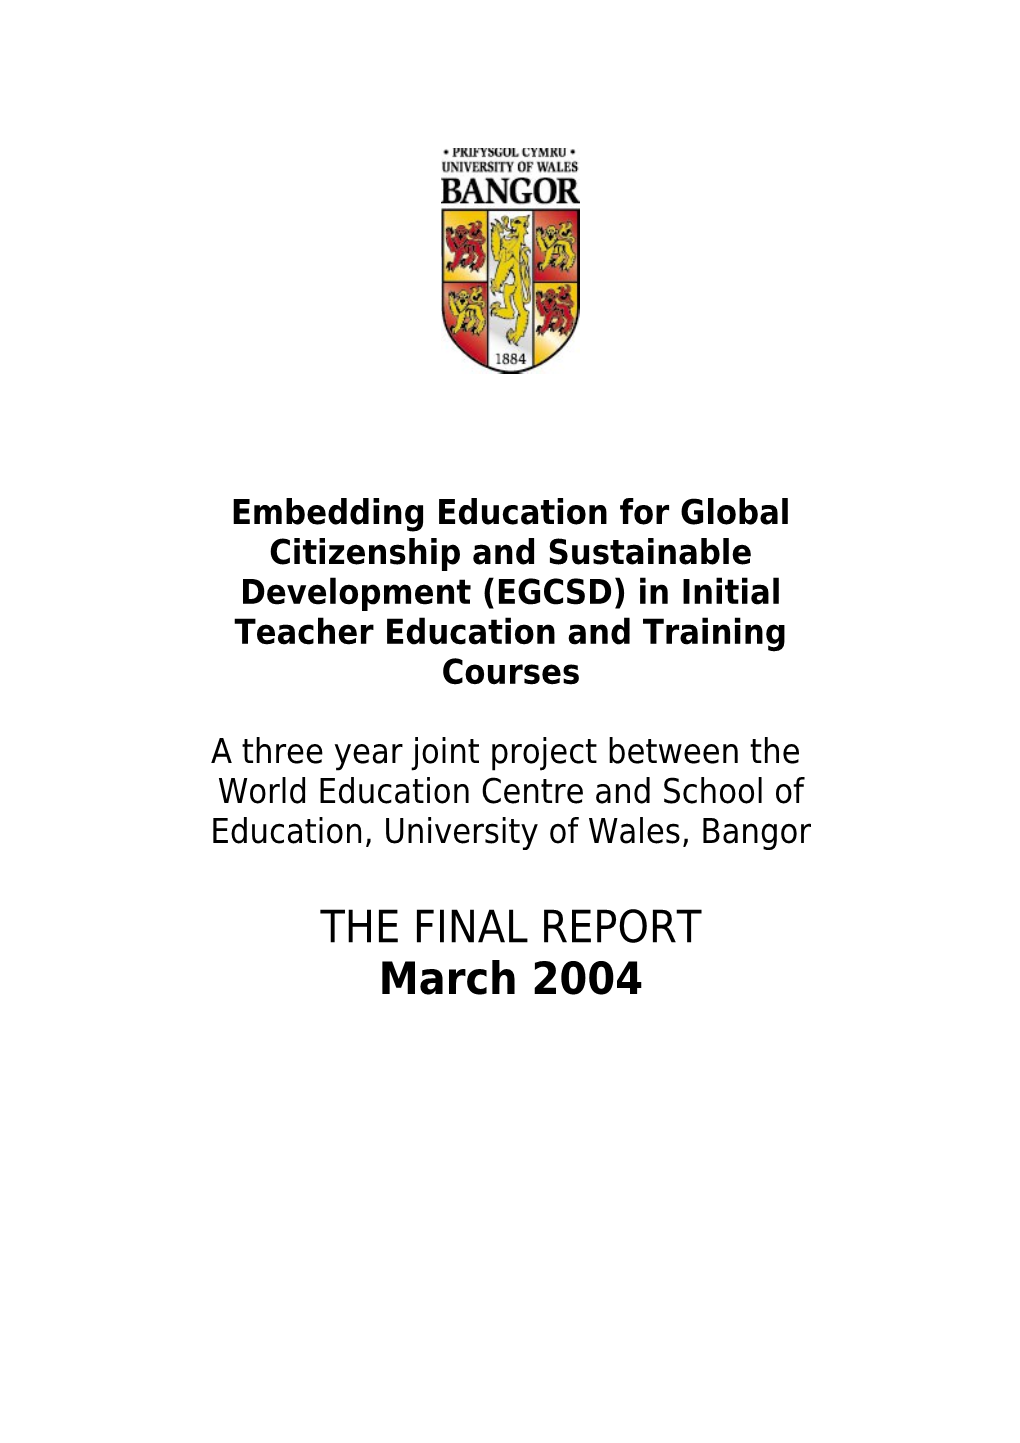 Embedding Education for Global Citizenship and Sustainable Development (EGCSD) In